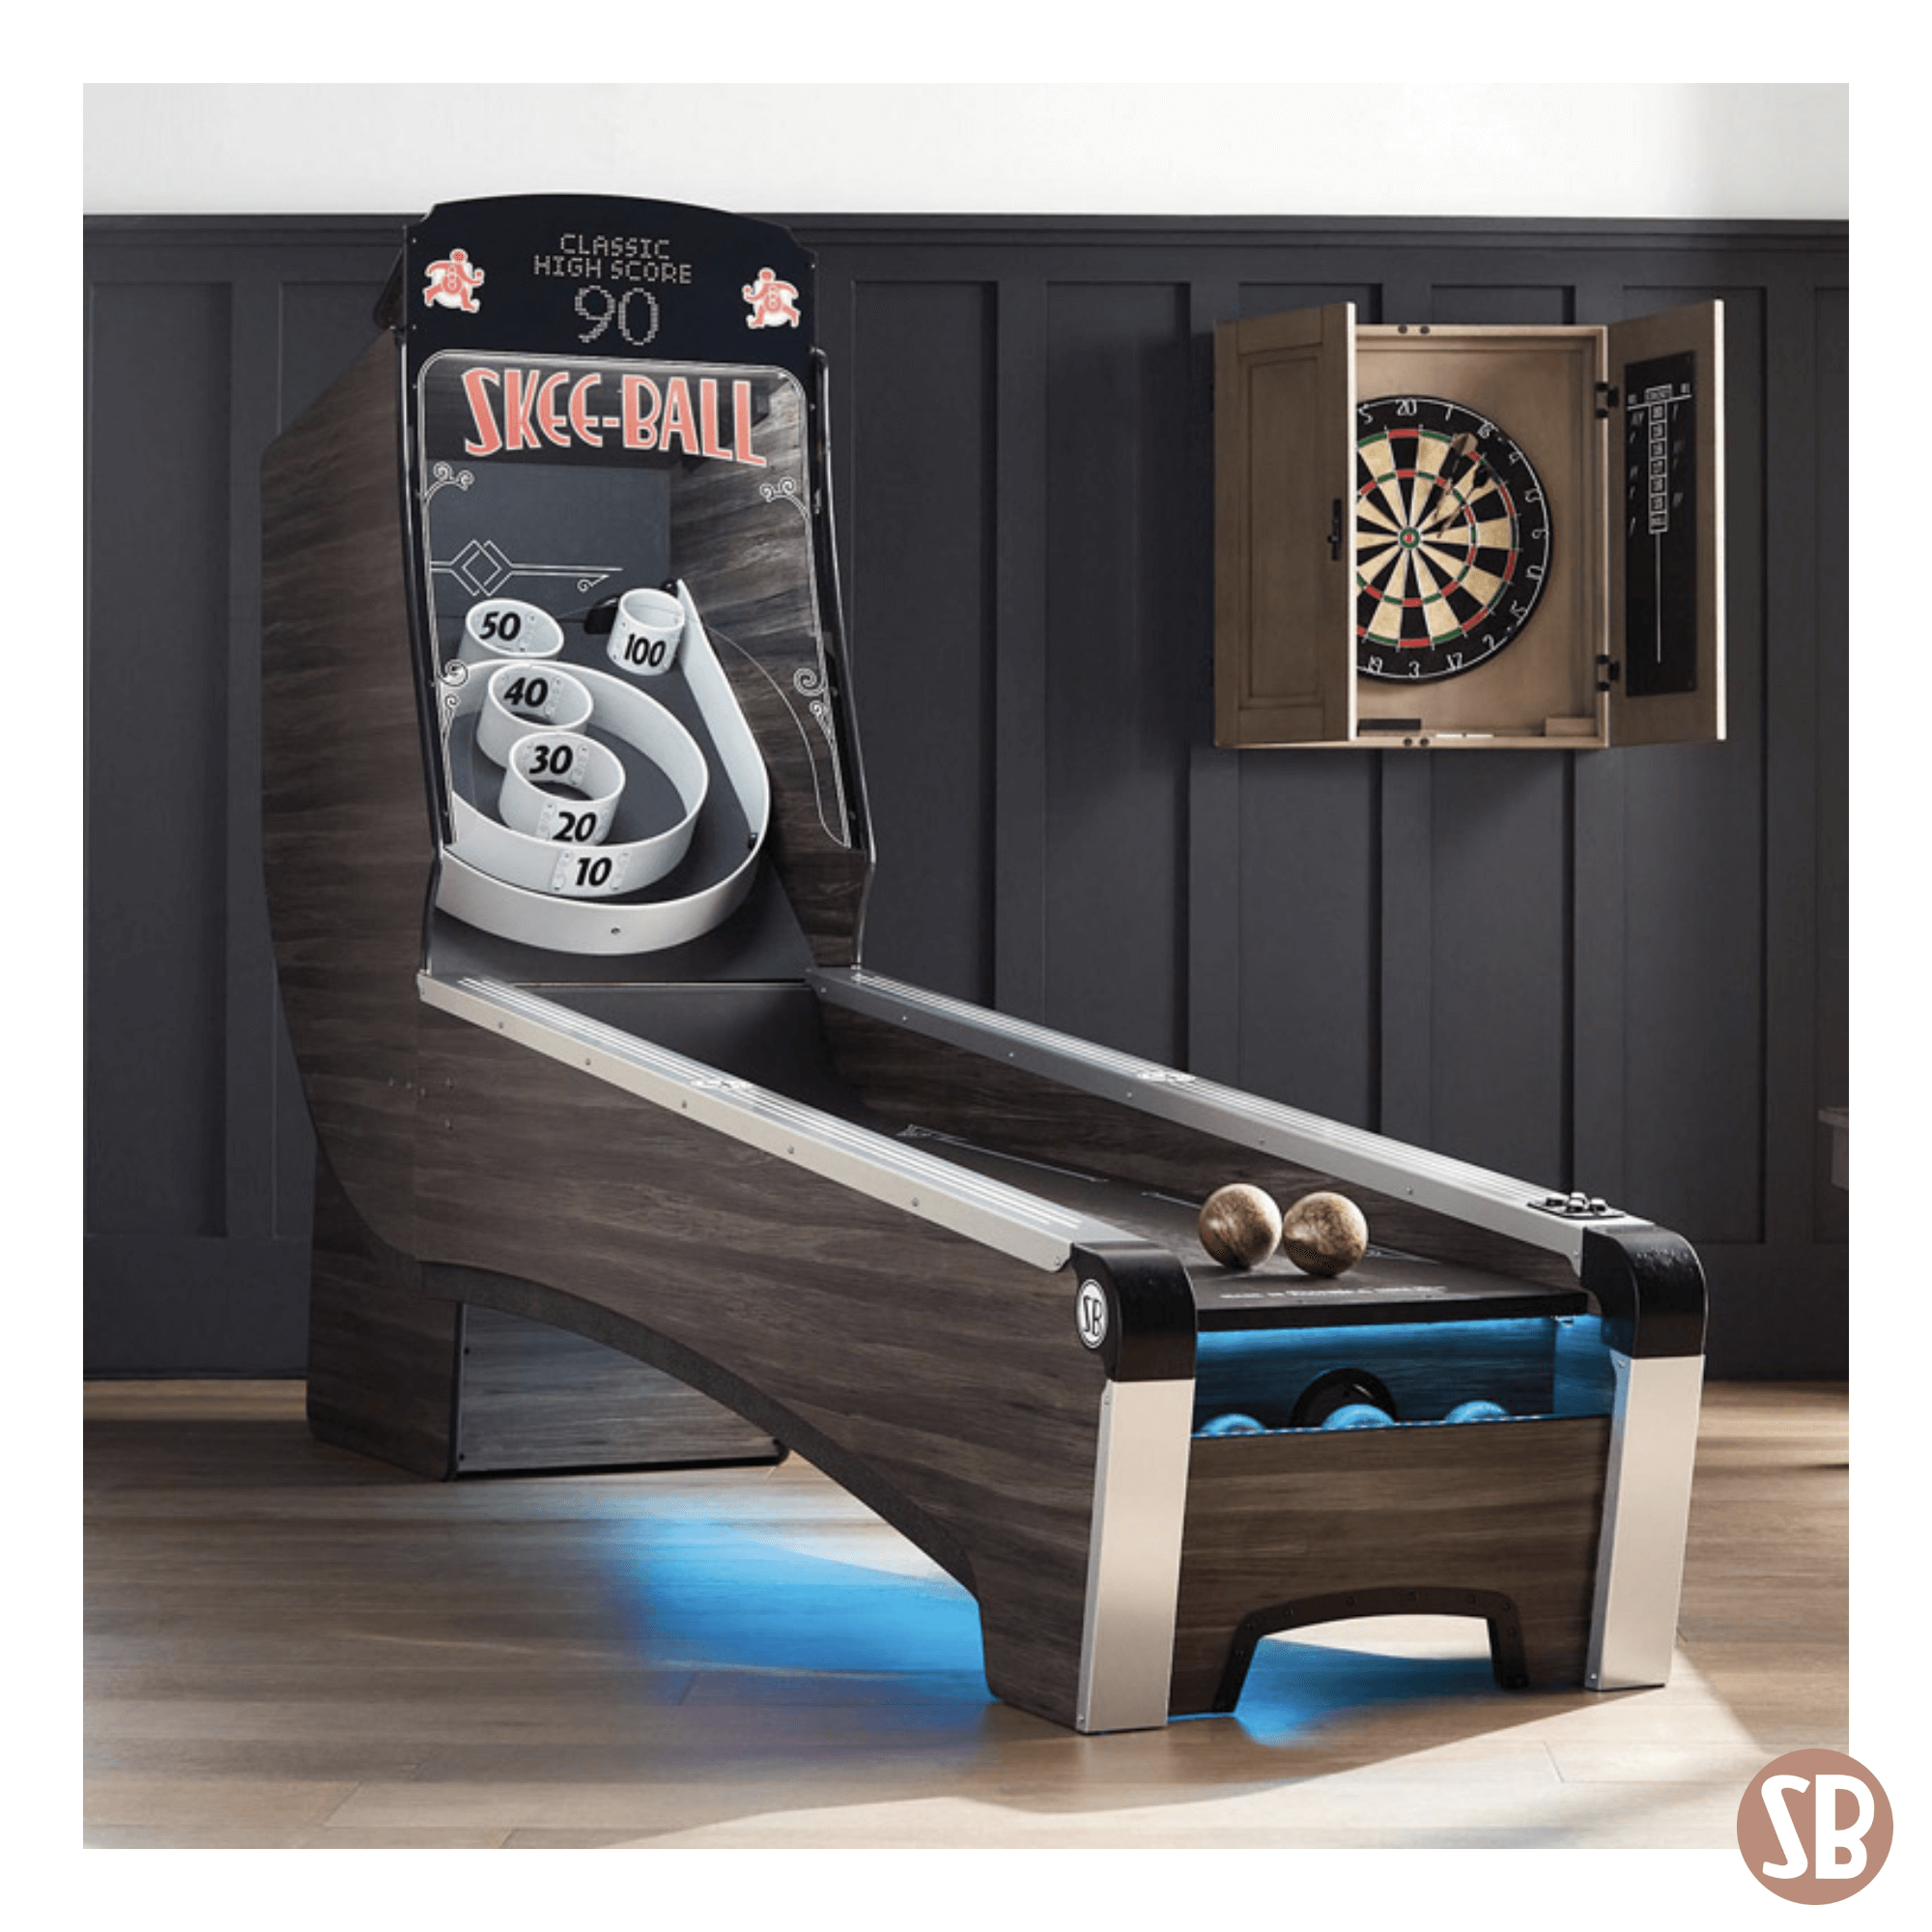 A Skee-Ball Home Alley machine next to a dart board